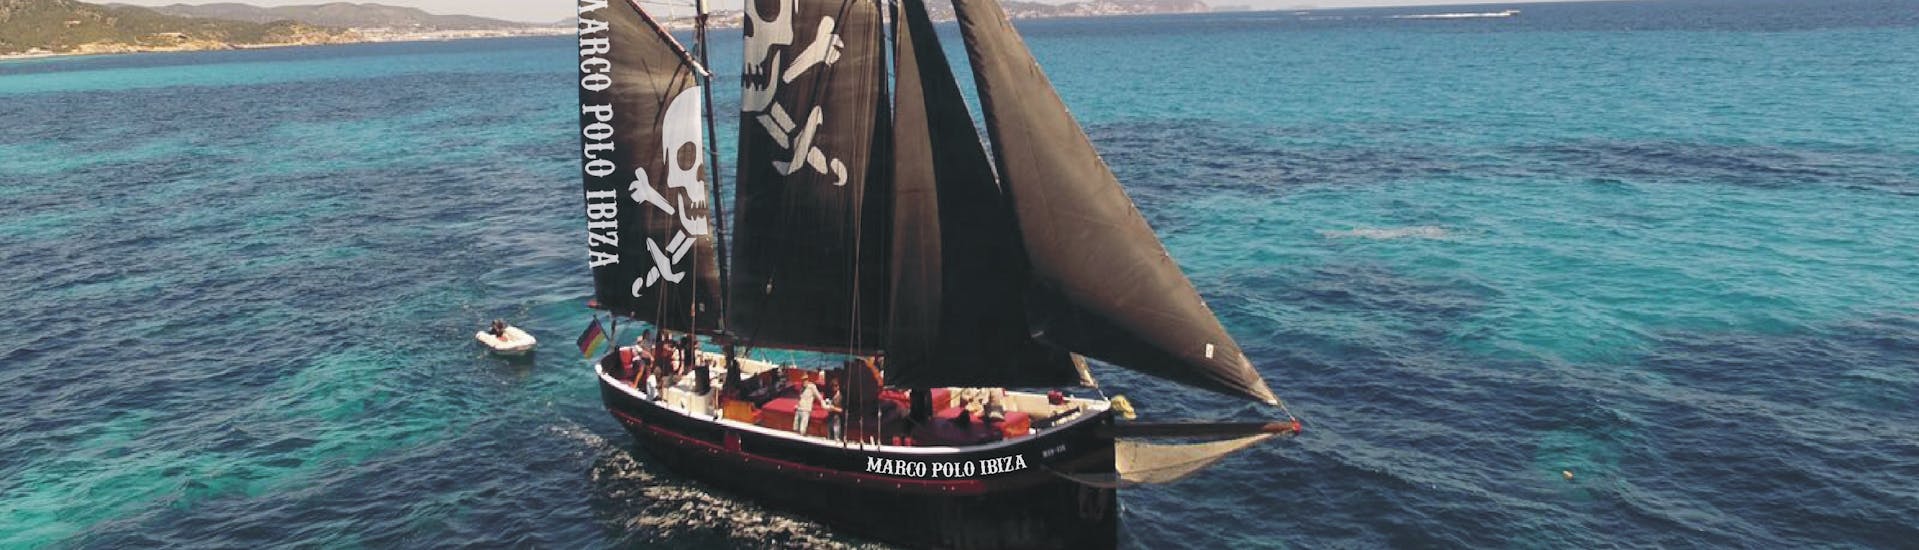 Our pirate boat is in the middle of the water during the Pirate Sailing Trip to Formentera from Ibiza with Apéritif & Snorkeling with Marco Polo Ibiza.